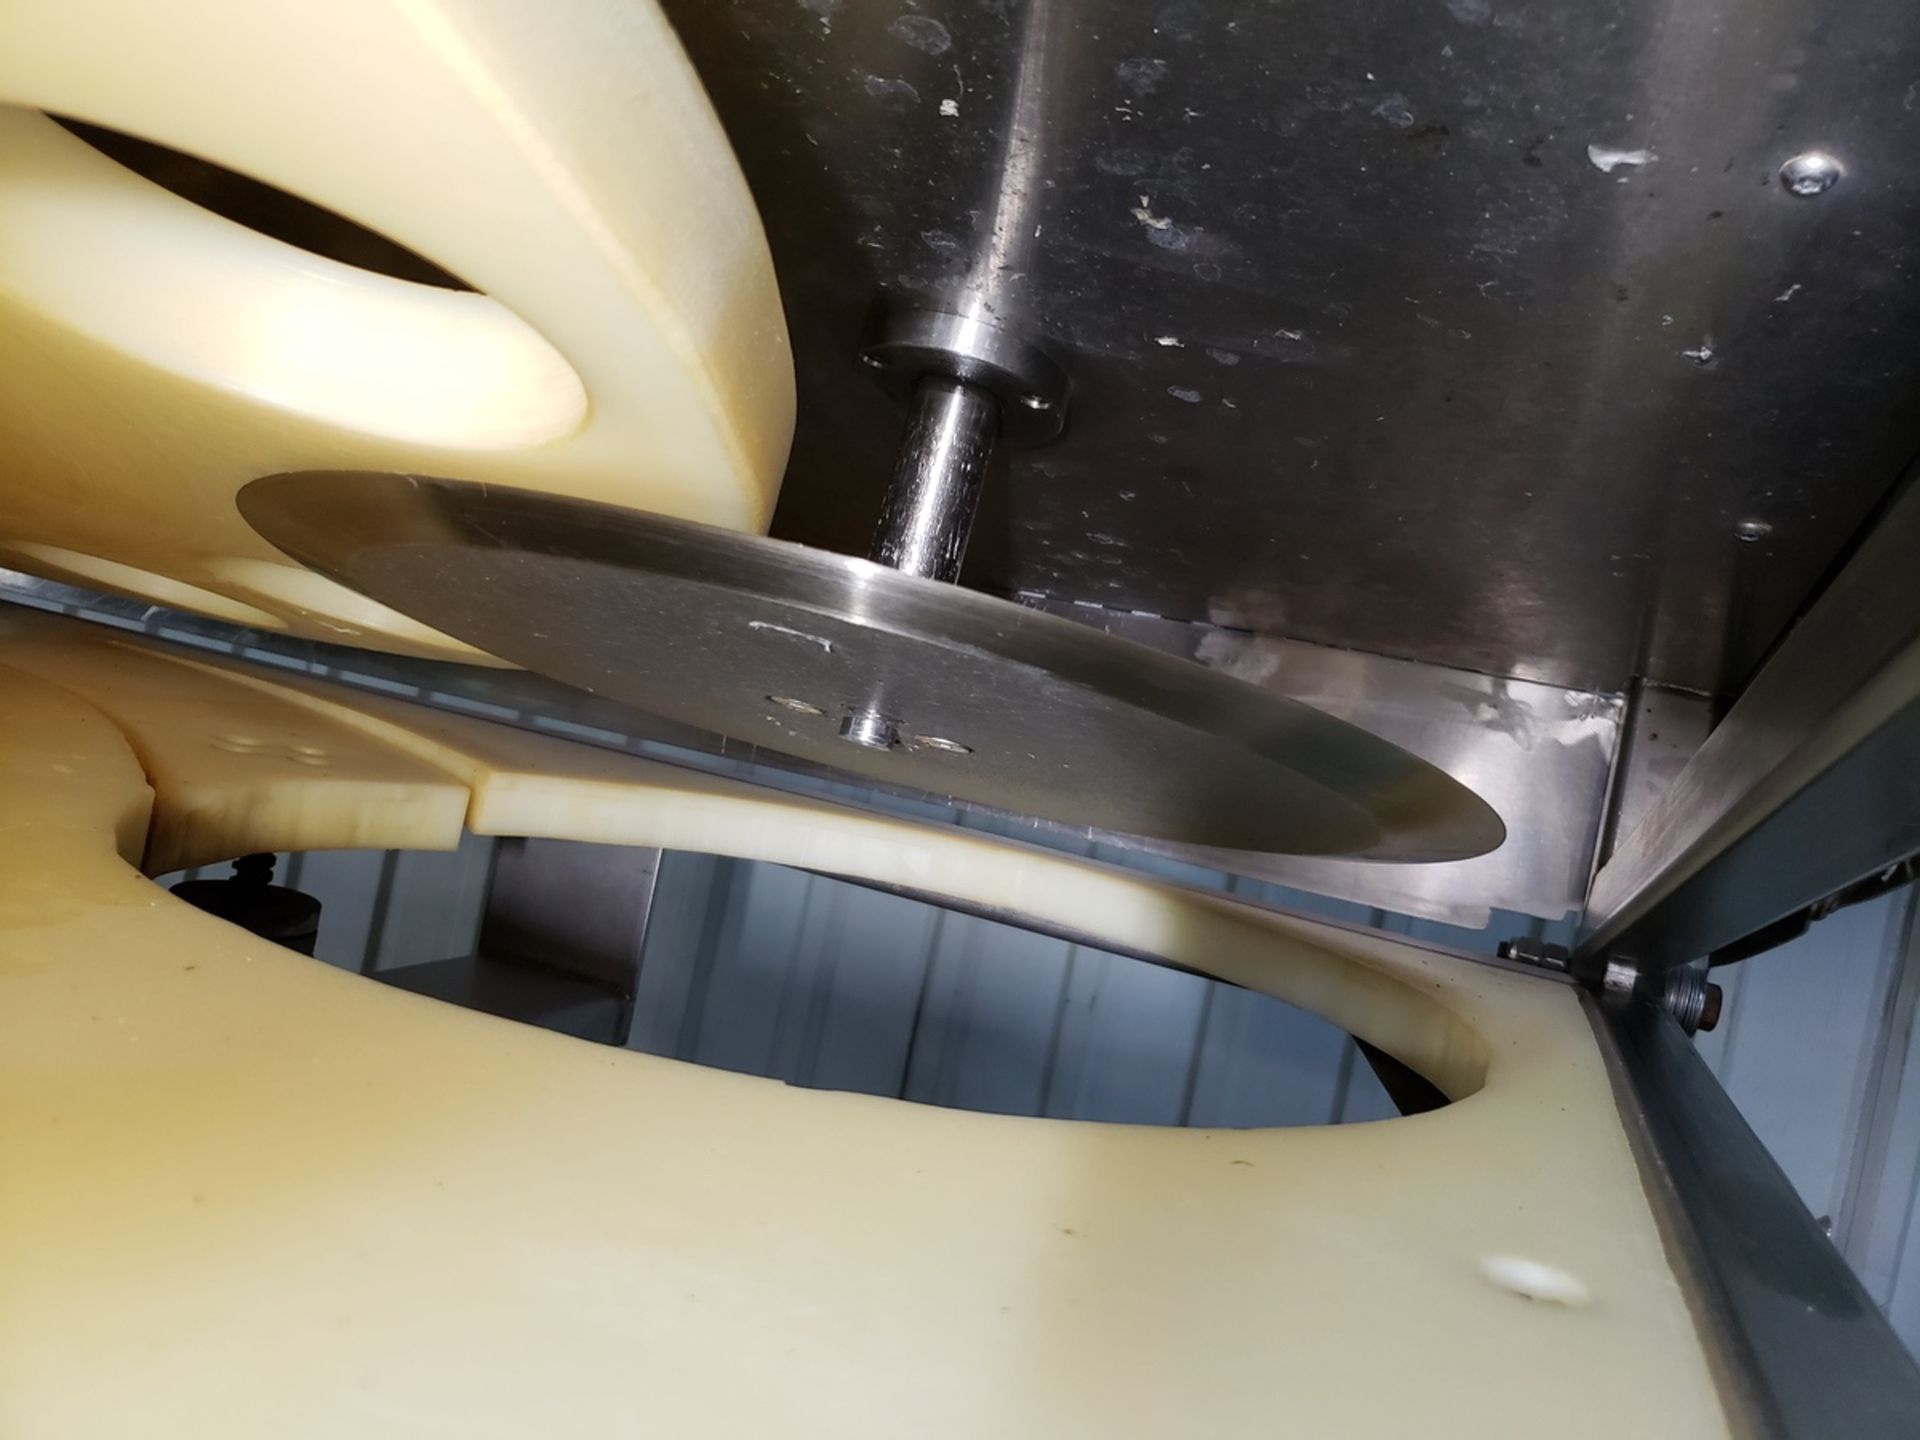 16 Station Carousel Type Continuous Onion Slicer, Dual Blade | Rig Fee: $250 - Image 3 of 4